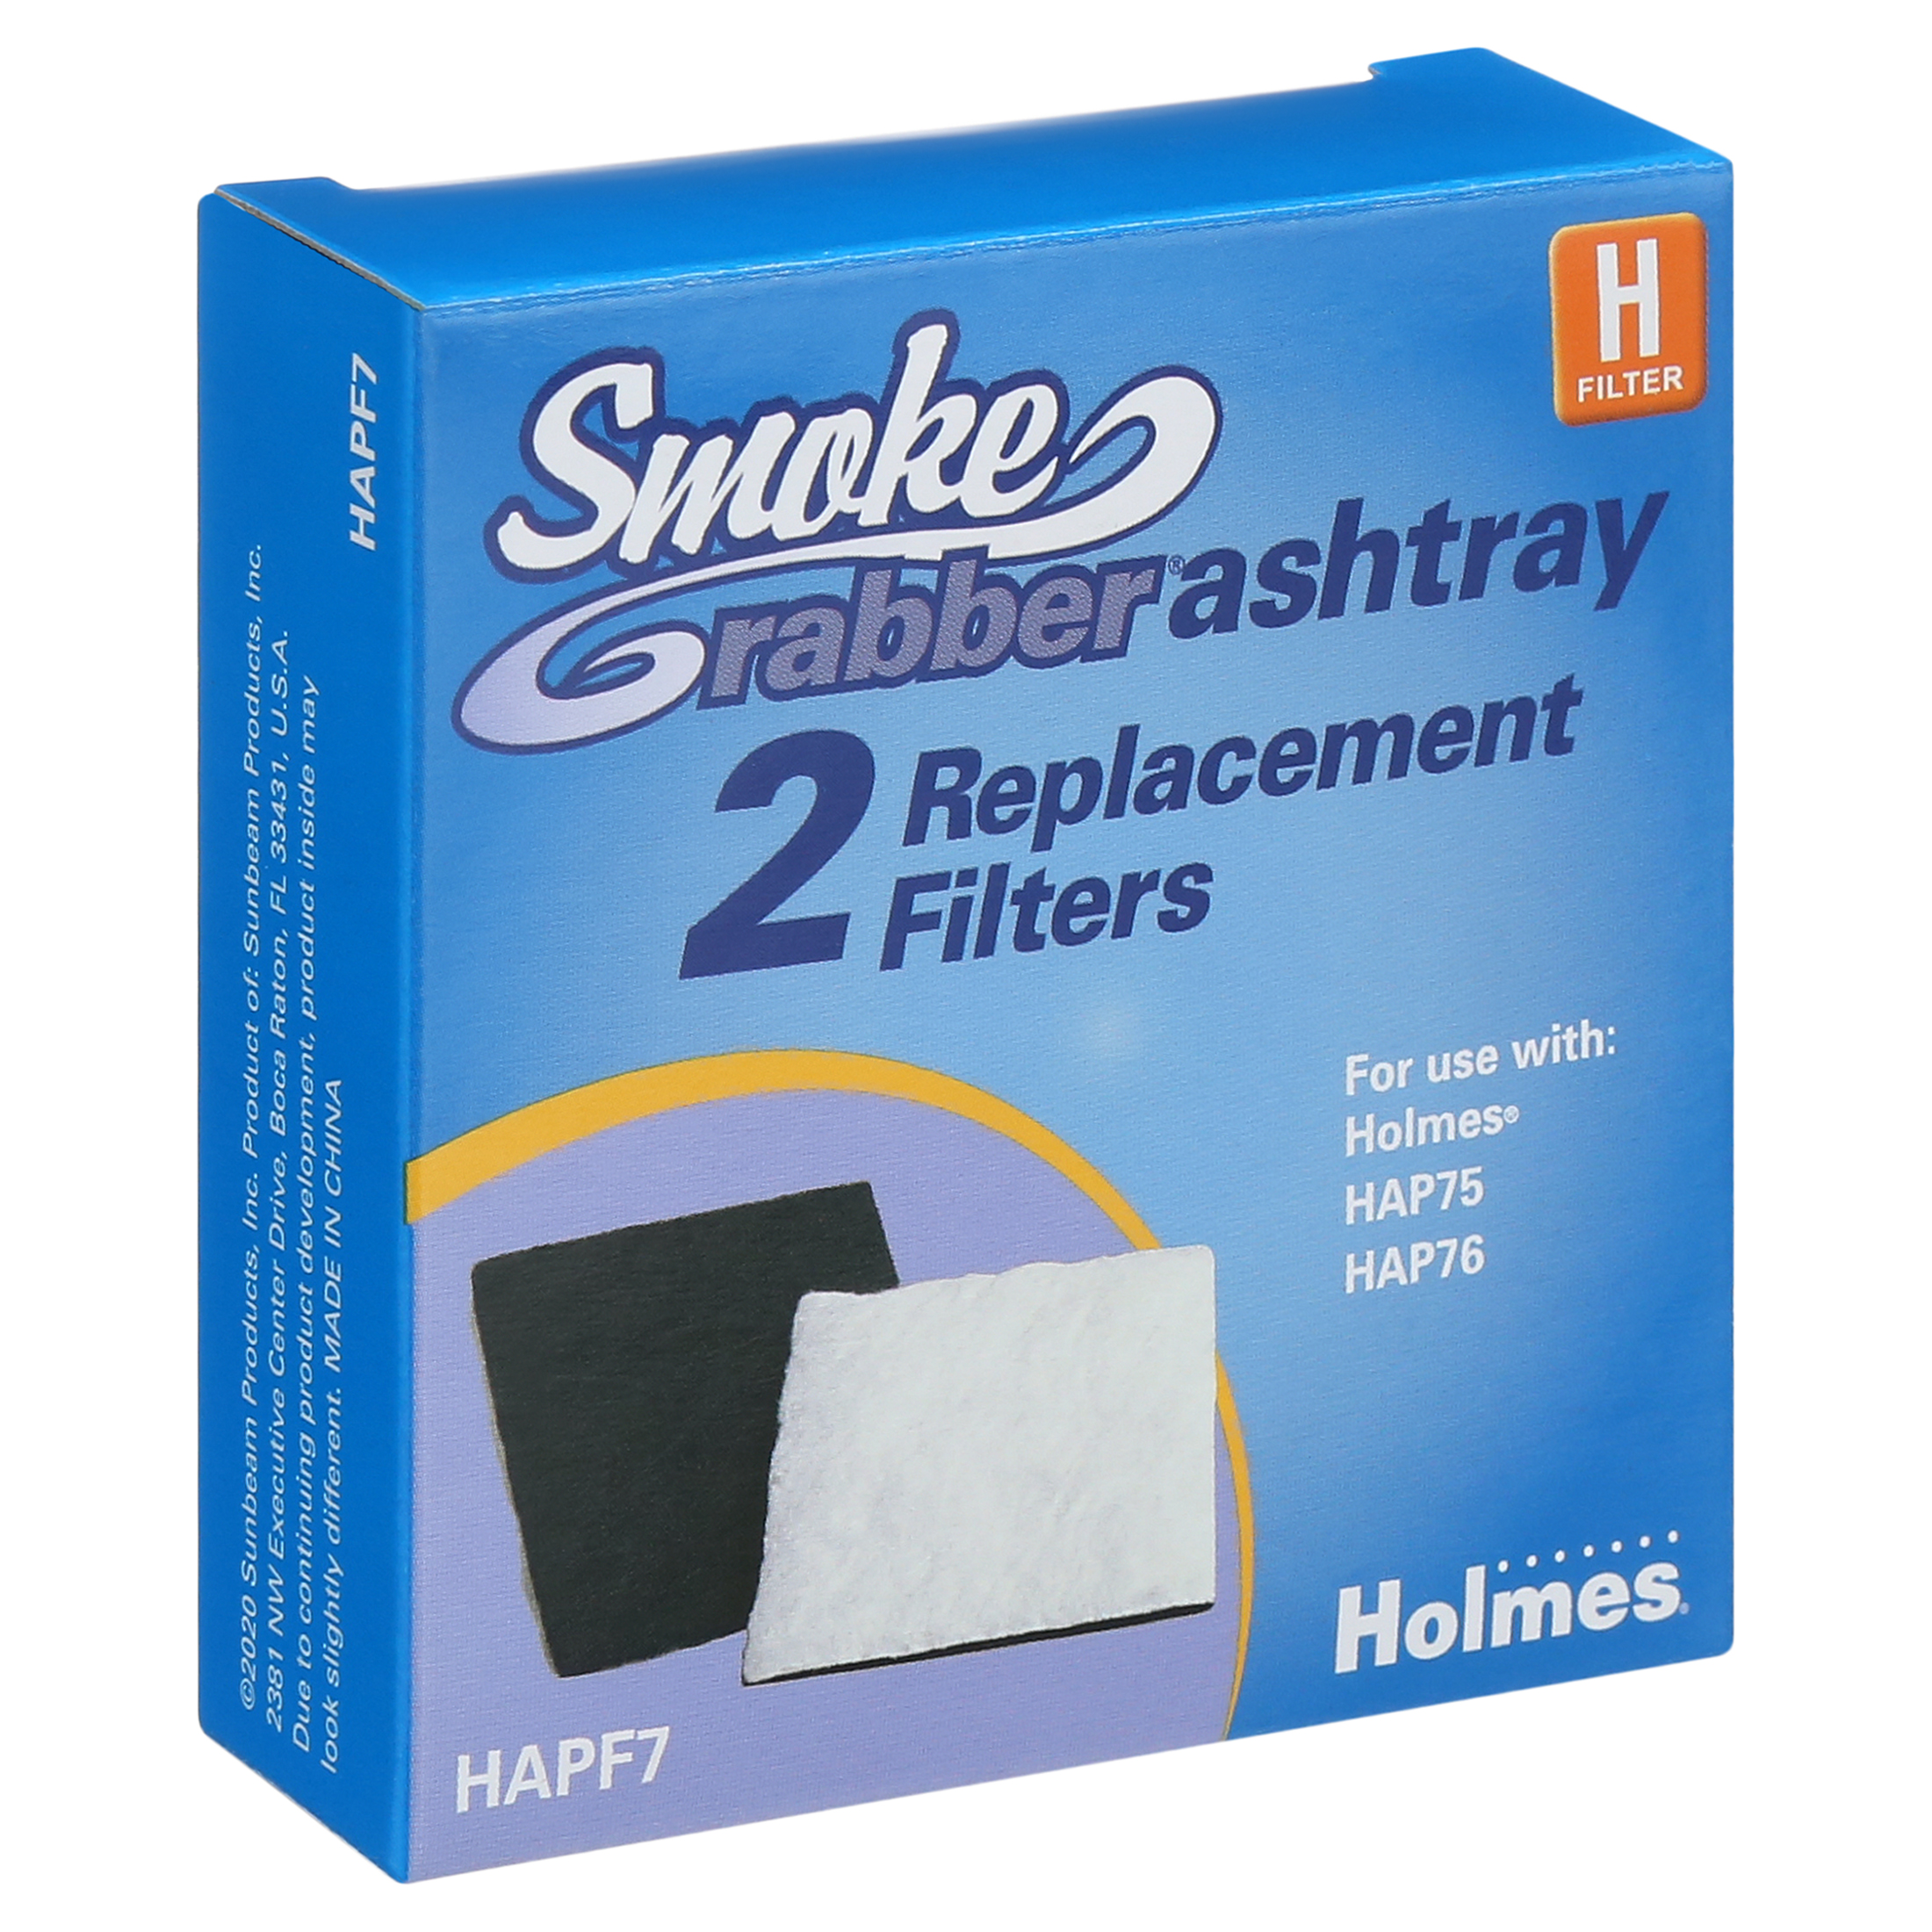 Holmes Smoke Grabber Ashtray Air Filter Replacement - image 3 of 6